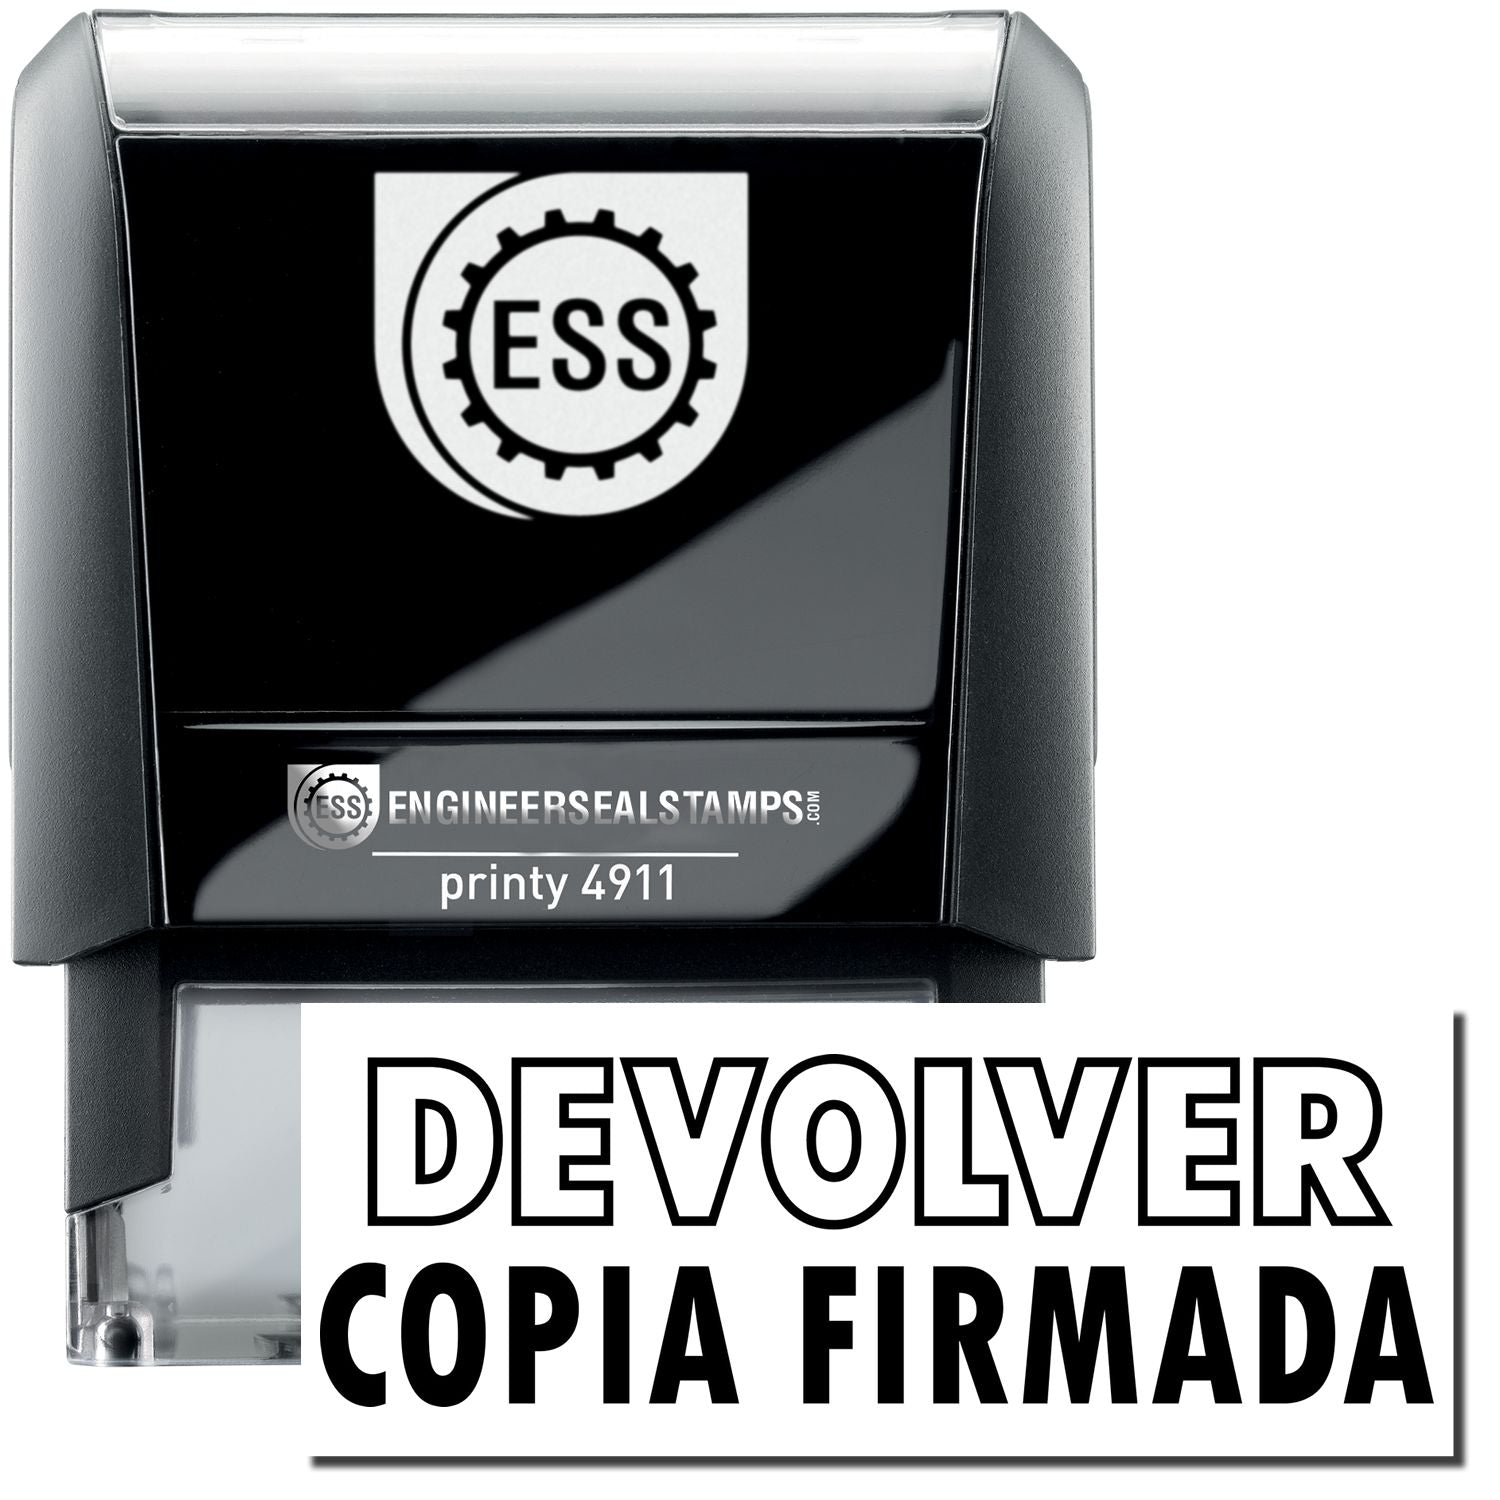 A self-inking stamp with a stamped image showing how the text "DEVOLVER COPIA FIRMADA" ("DEVOLVER" in an outline style) is displayed after stamping.